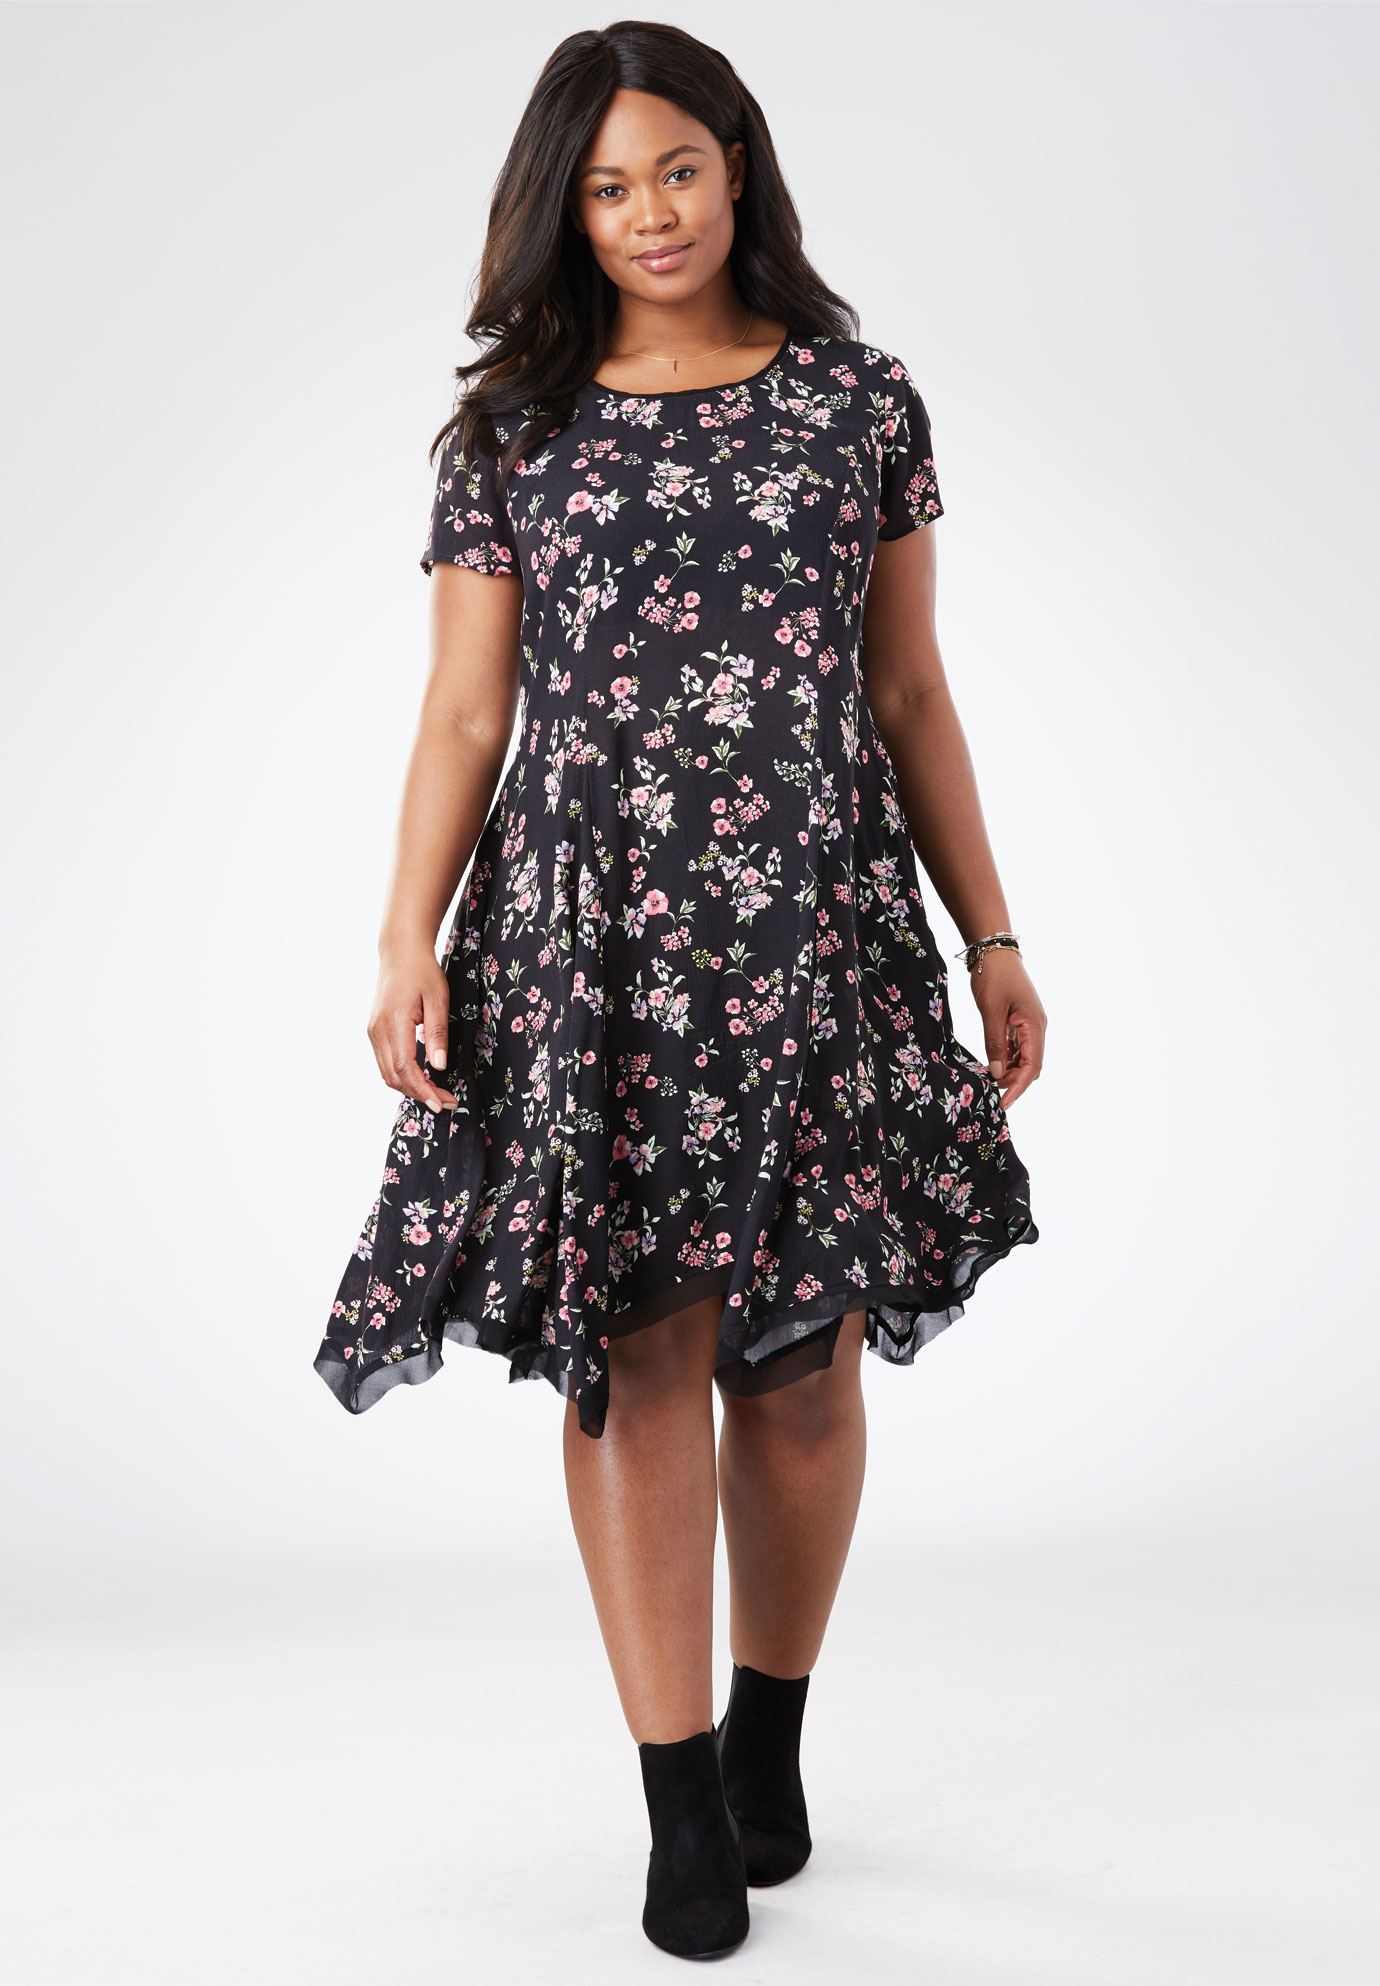 The Flowy Dress | Plus Size Dresses | Woman Within